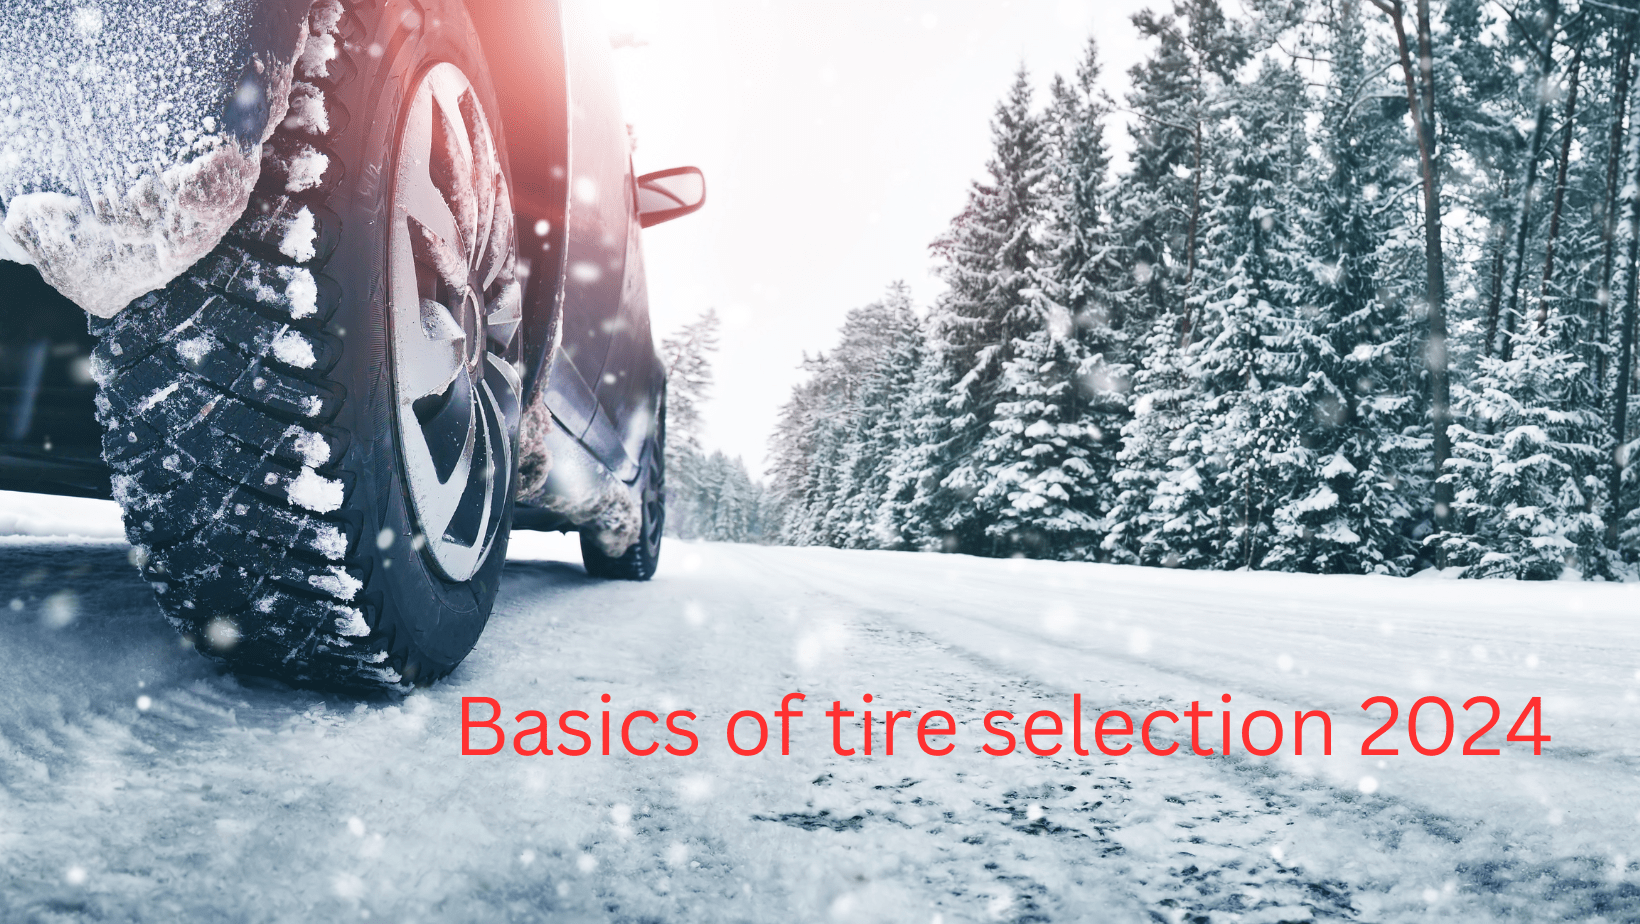 Basics of tire selection: just for you